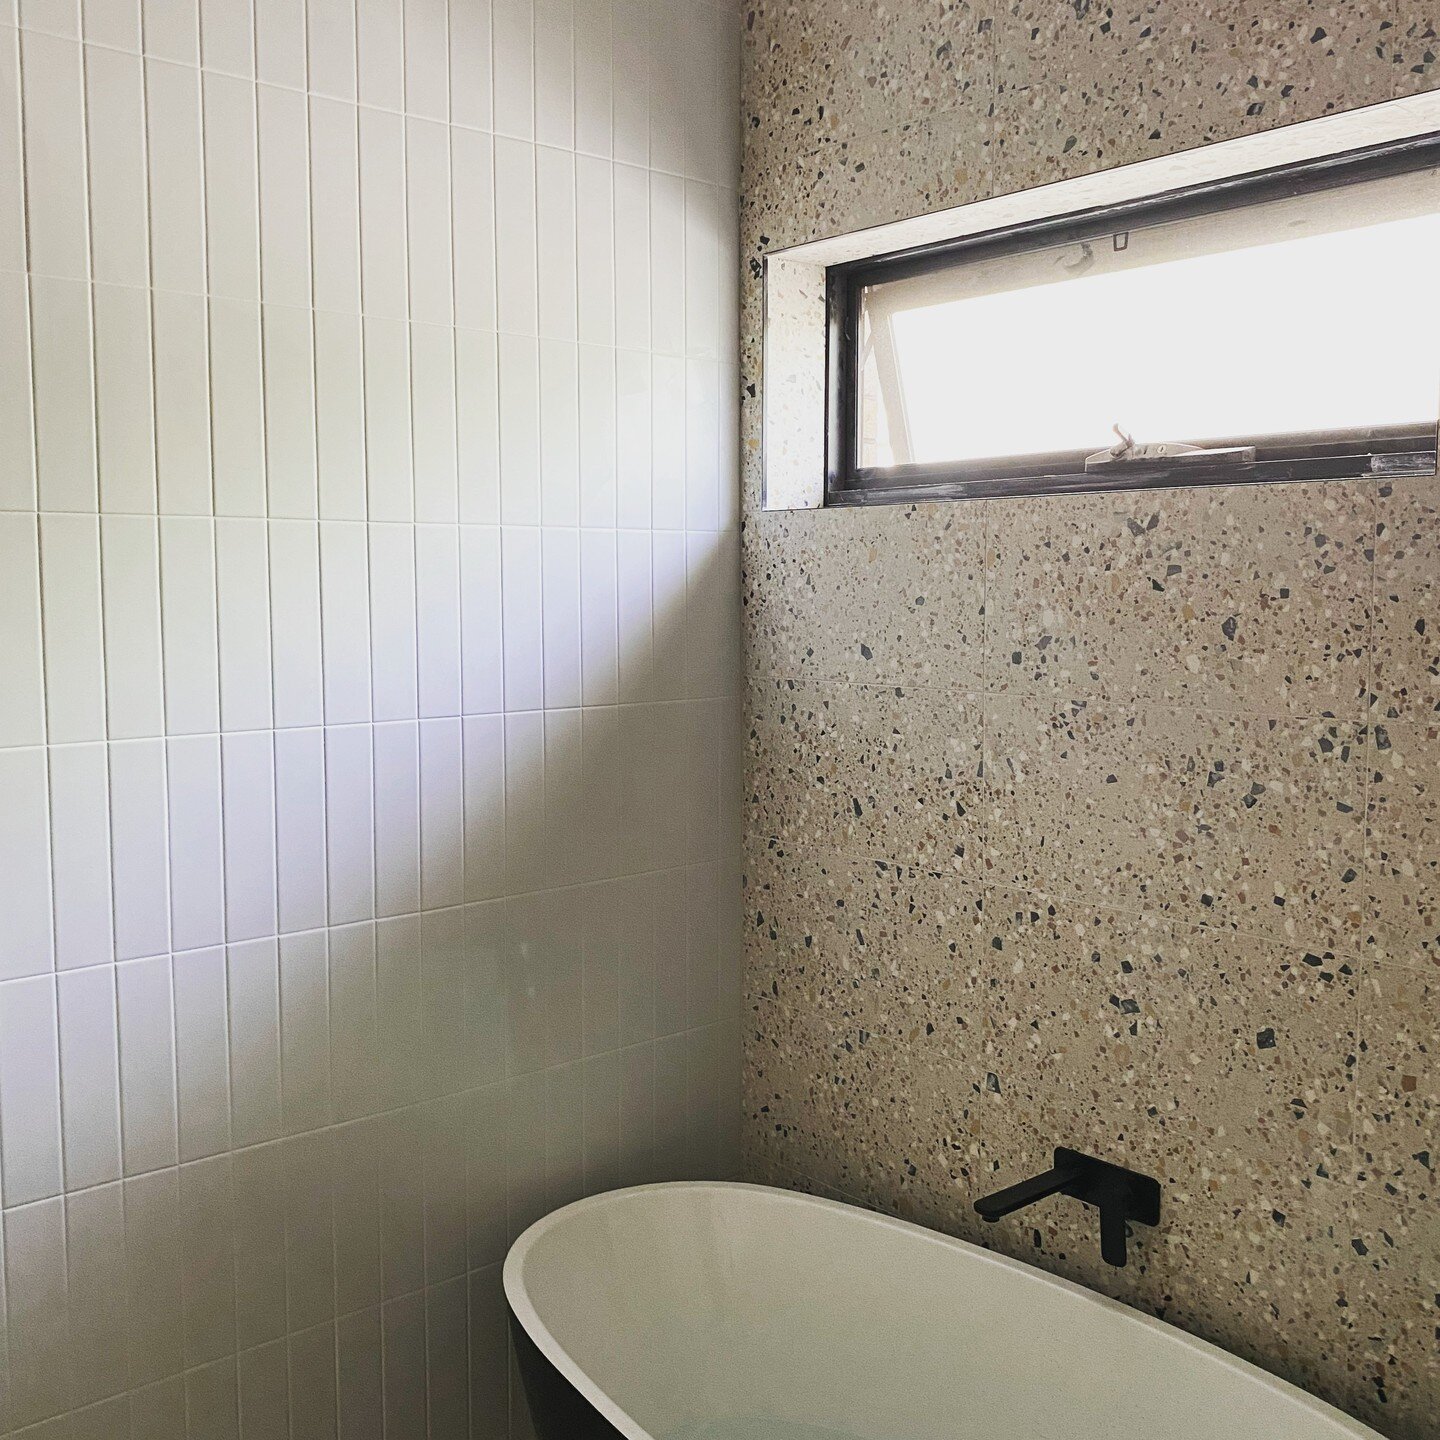 A Wednesday work in progress! Italian made terrazzo matched with @caromaaustralia fittings #newhome